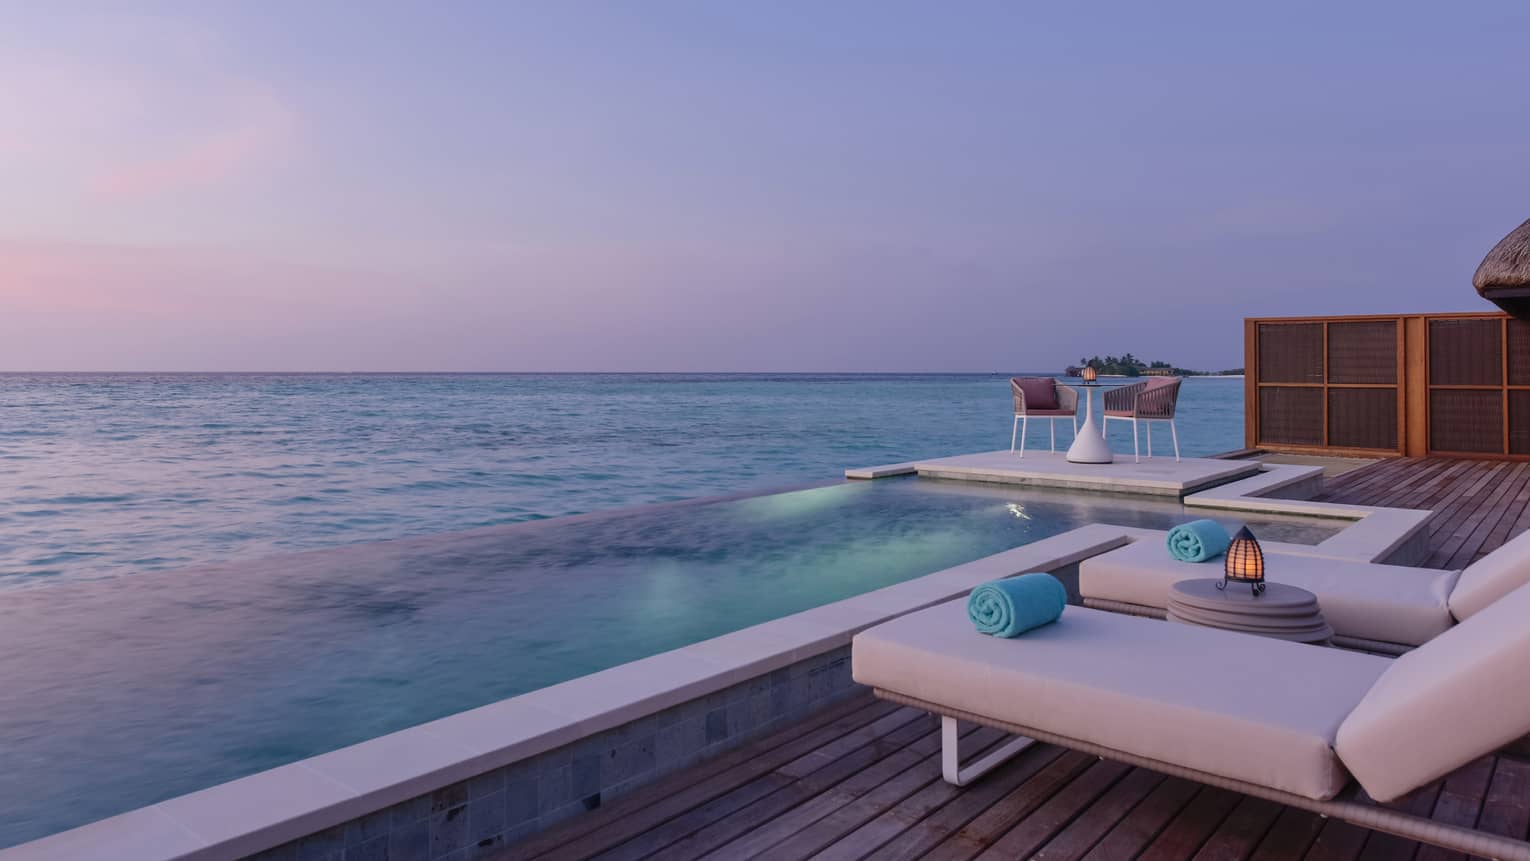 A lounging area next to the water with lounge chairs and a clear sunsetting sky.